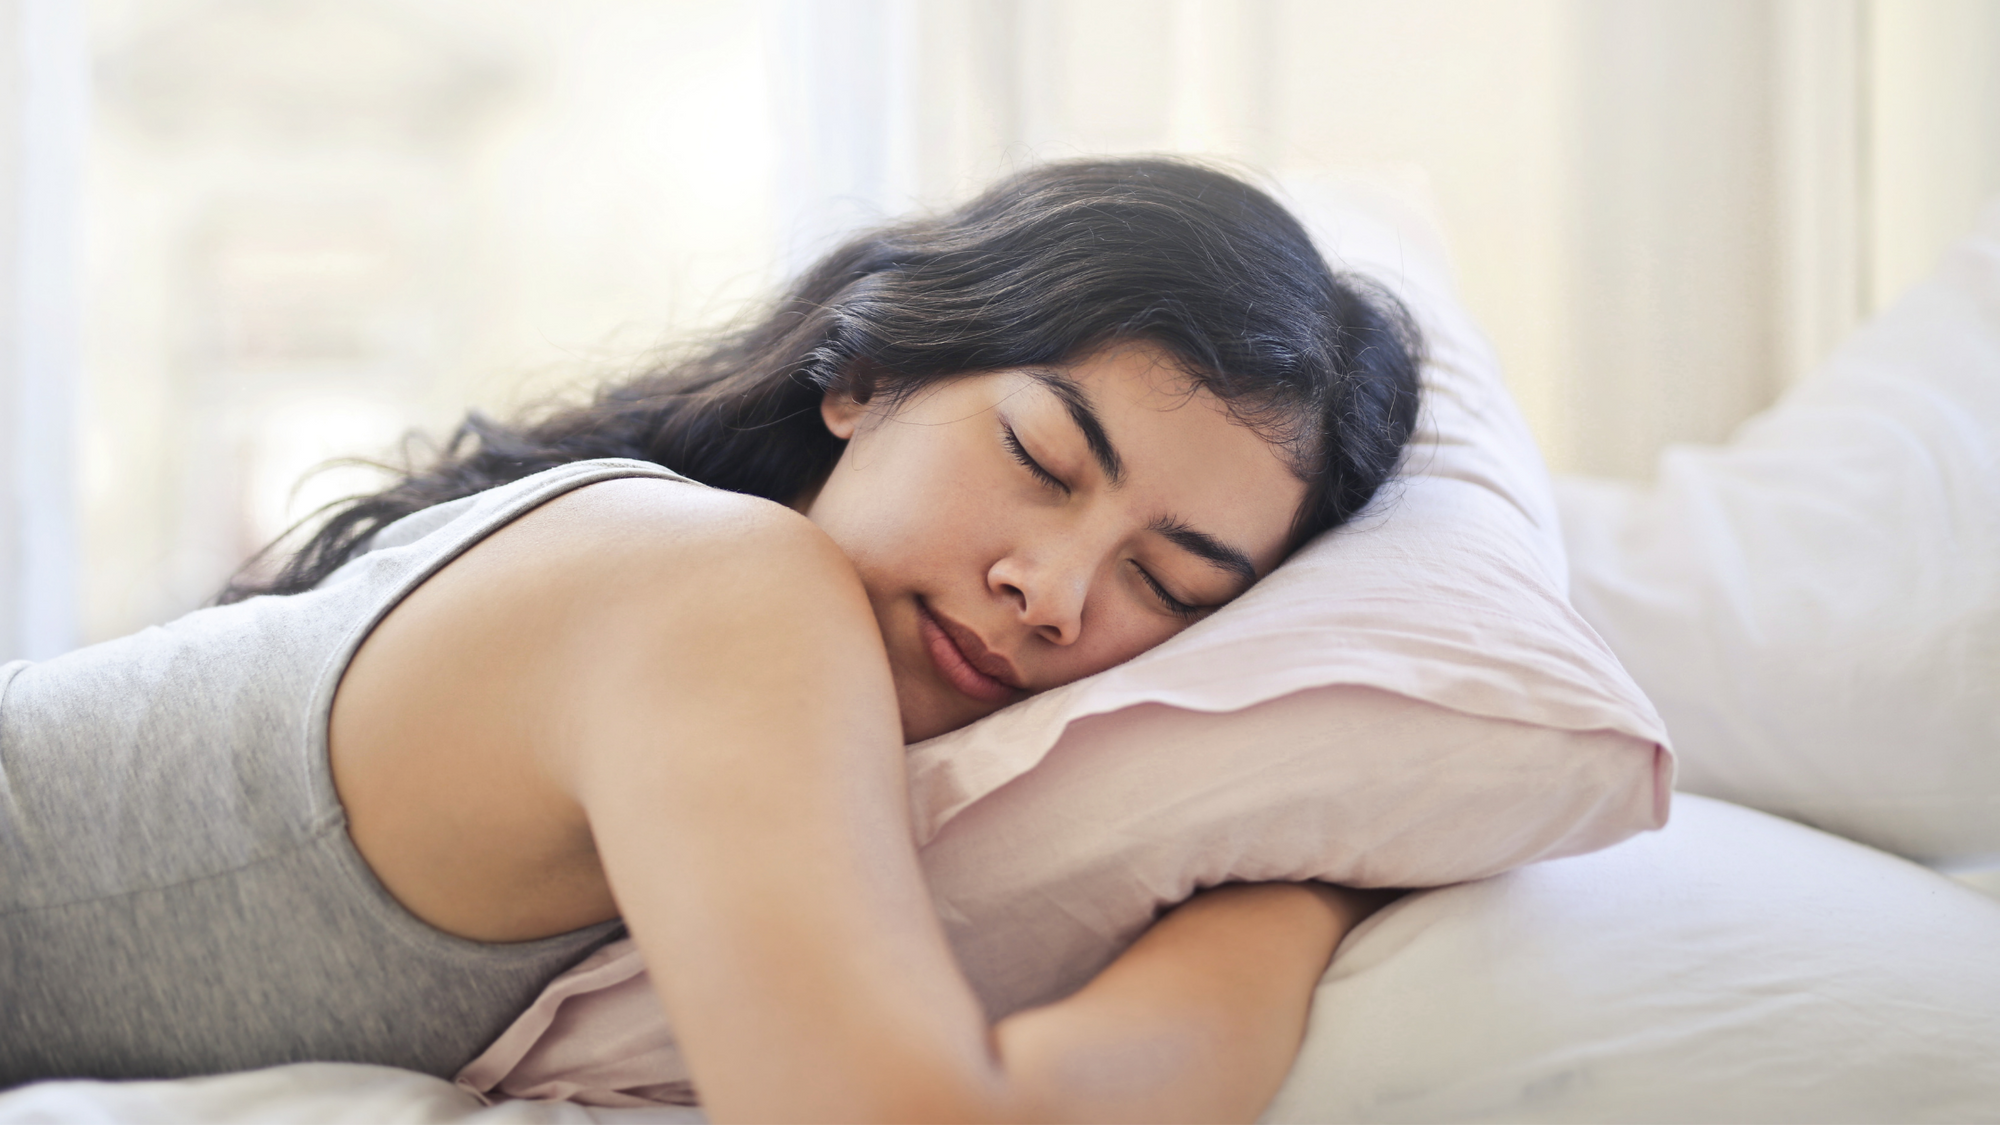 The Importance of Quality Sleep to Overall Health and 3 Tips to Get Better ZZZ’s